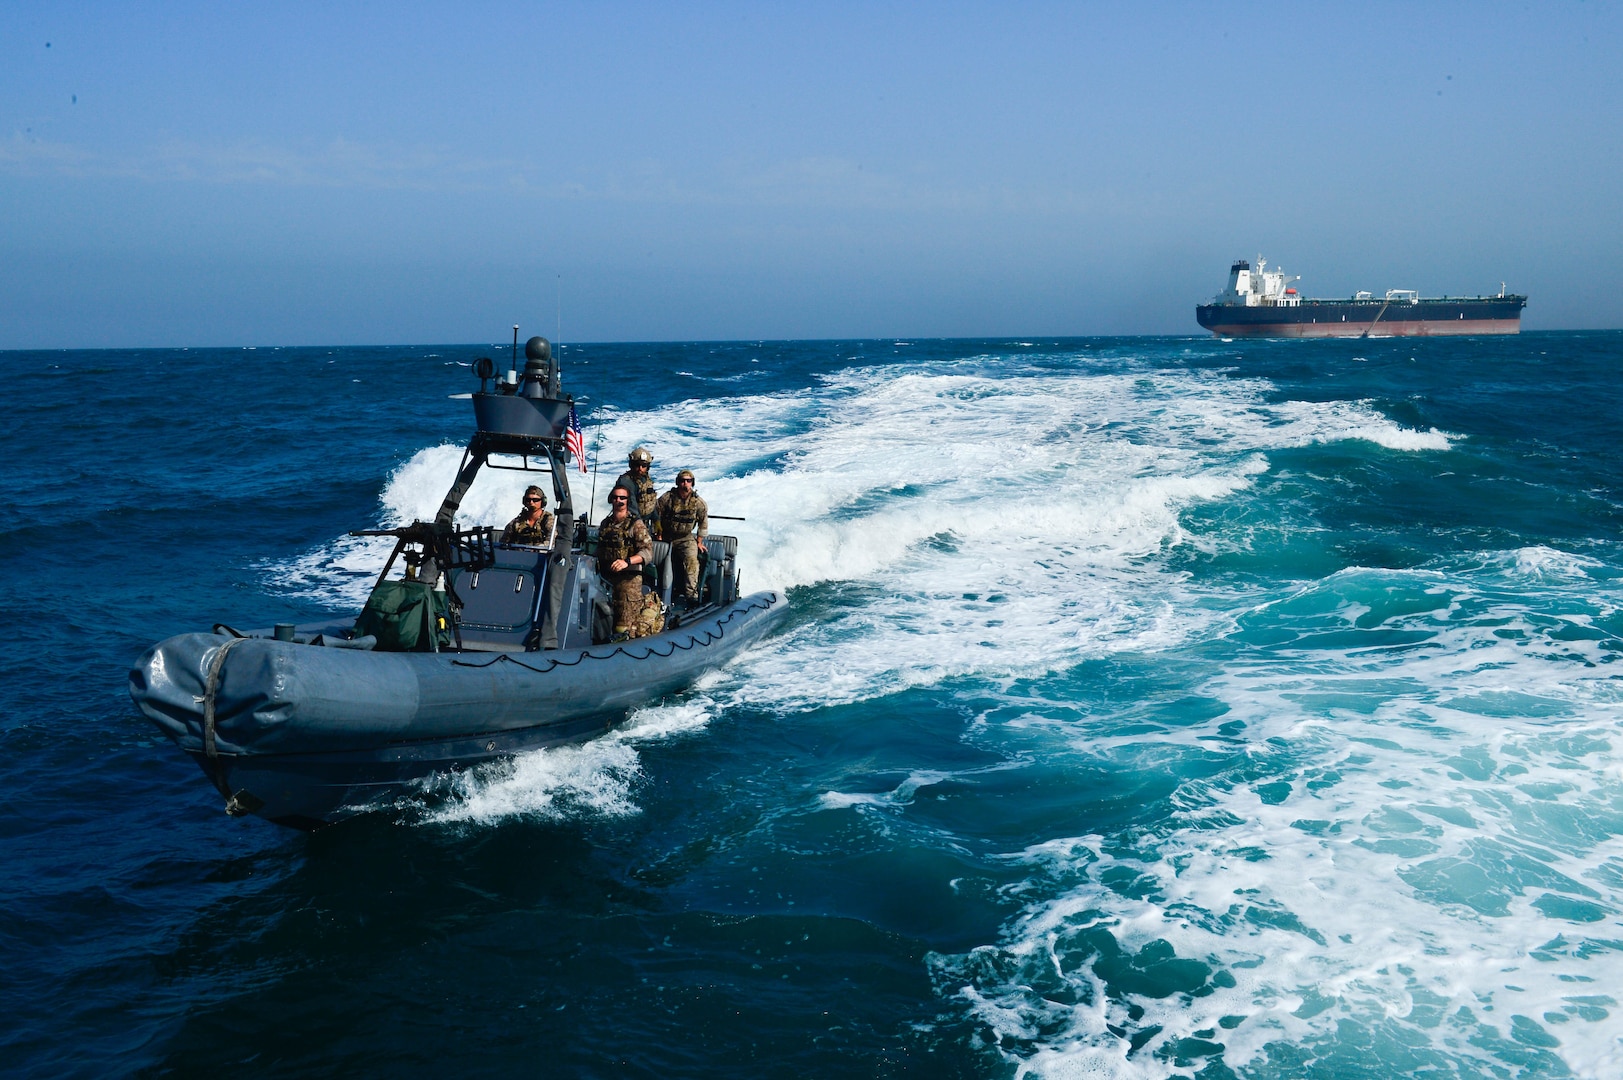 KUWAIT - A U.S. Navy special warfare combatant craft crew returns from a simulated mission to recover a hijacked tanker Apr 3, in Kuwait territorial waters as part of exercise Eagle Resolve 2017. (U.S. Army Photo by Master Sgt. Timothy Lawn)